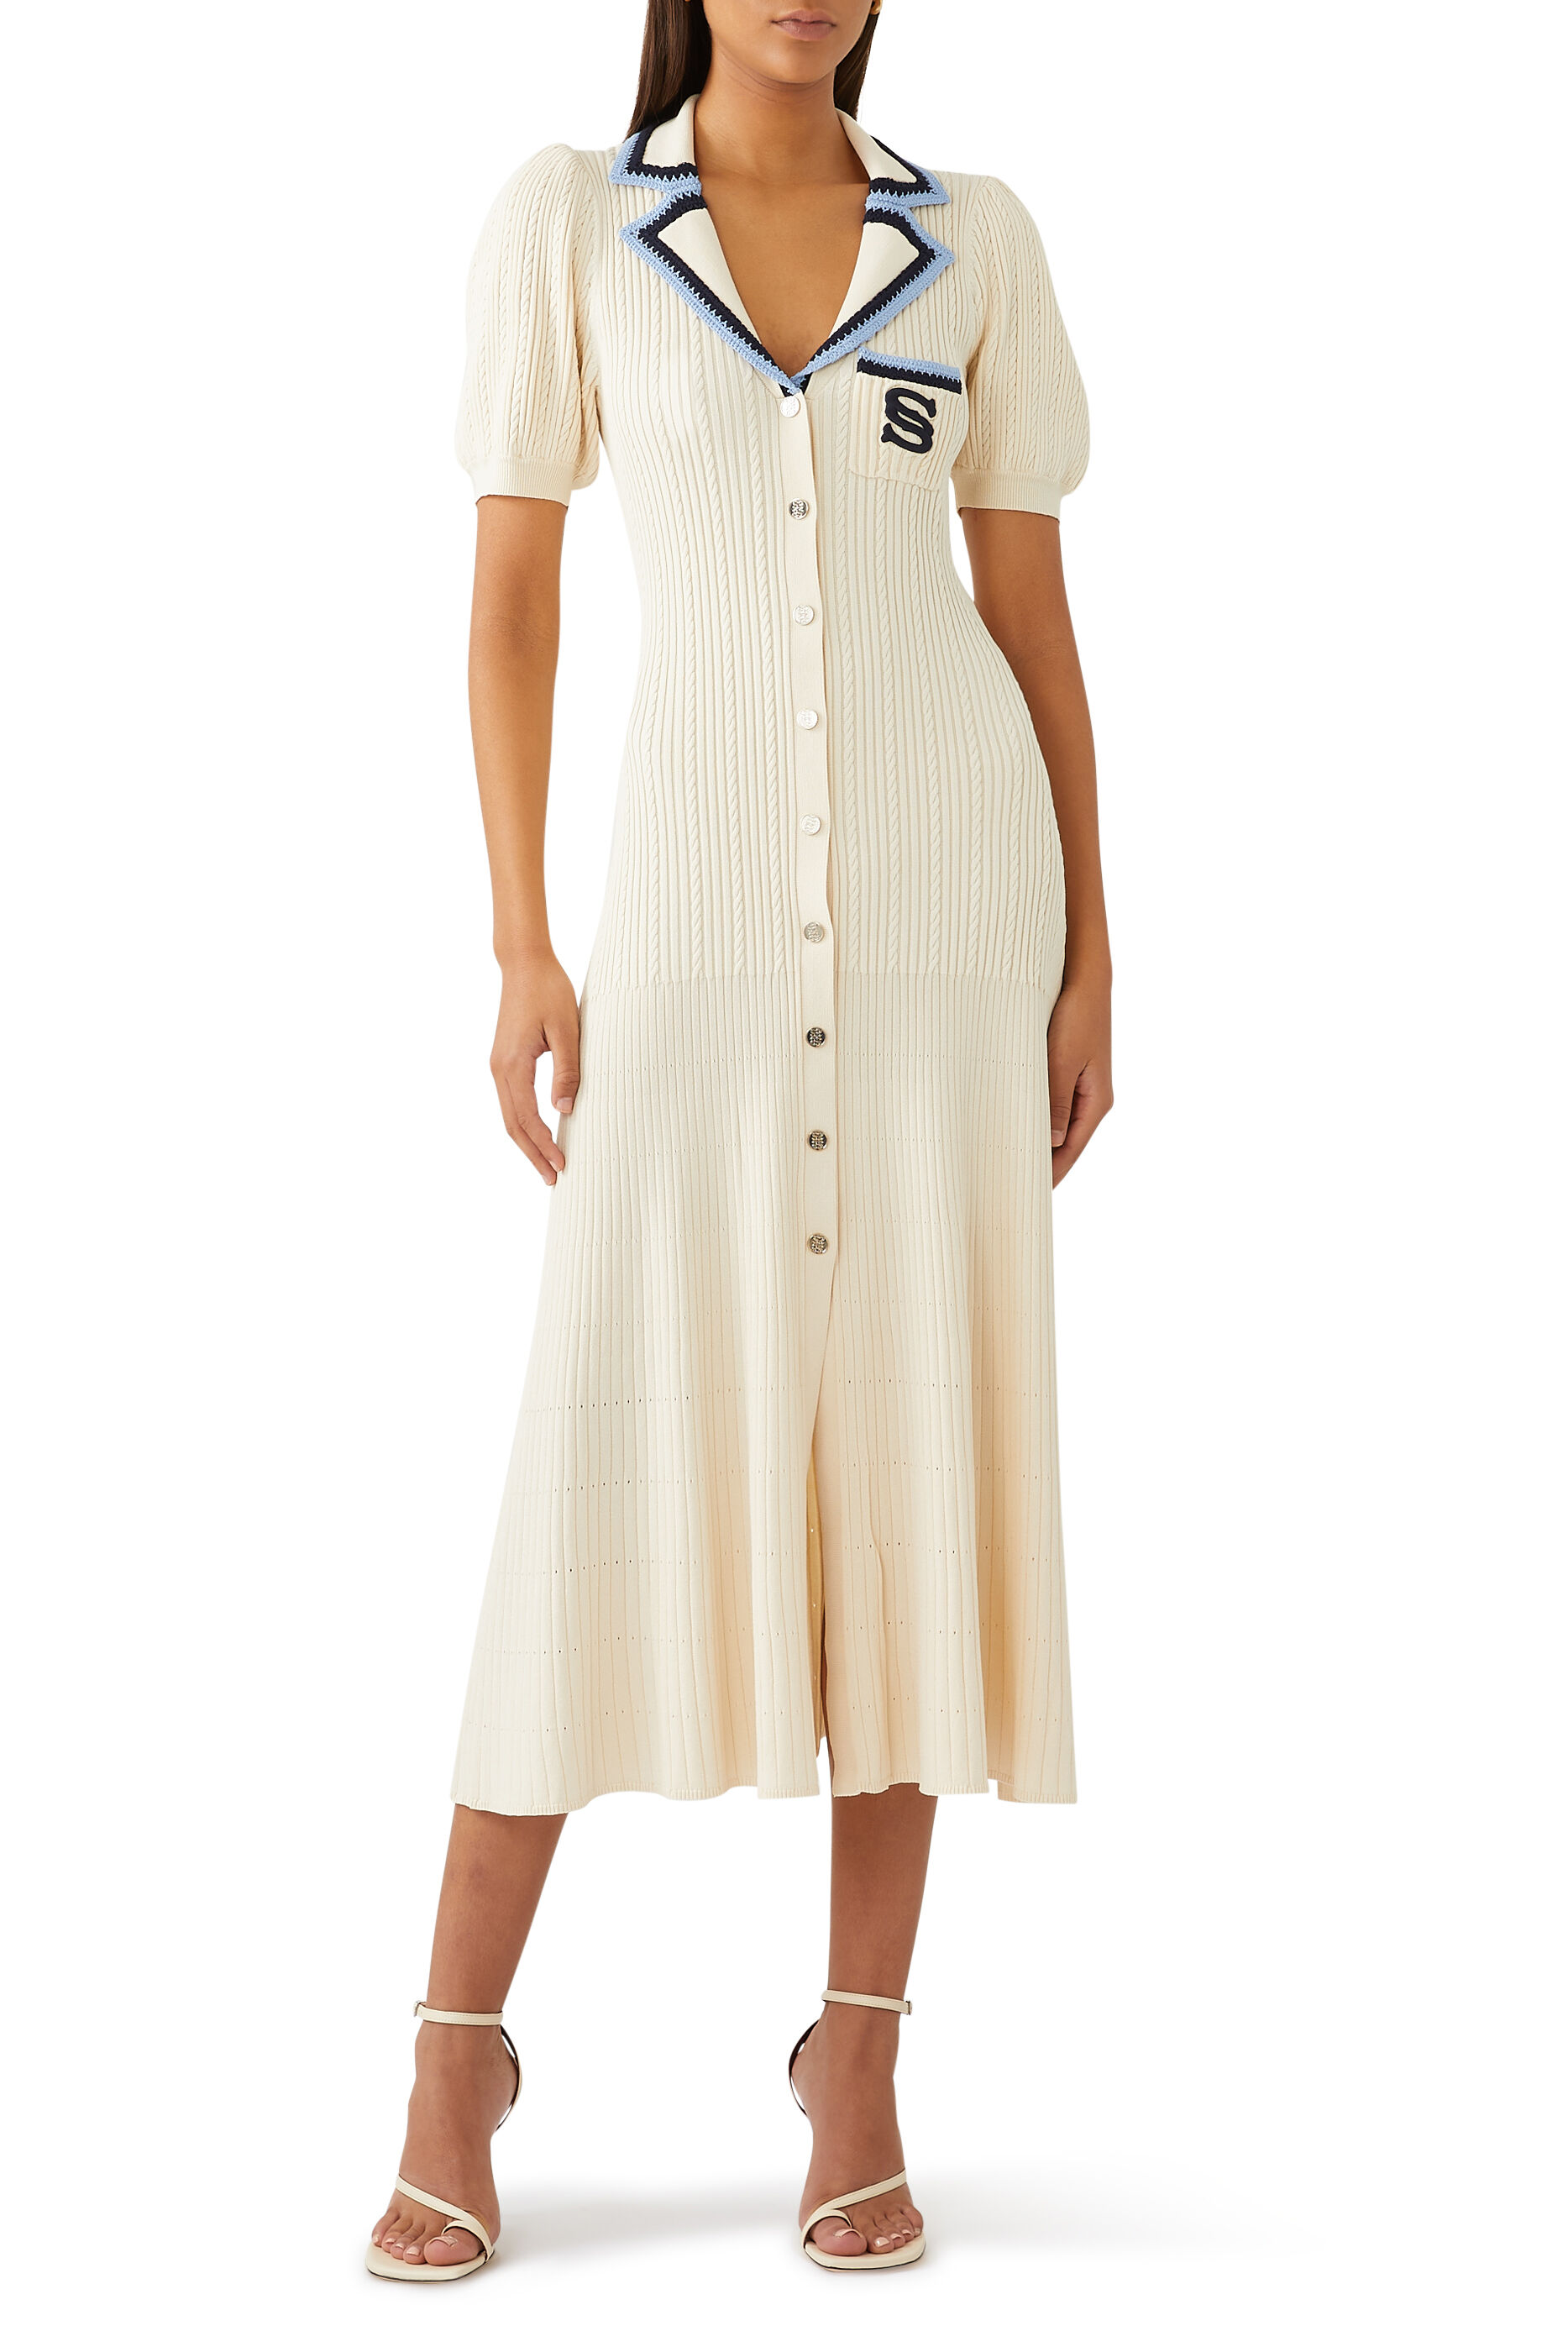 Buy Sandro Long Knit Dress with S Patch for Womens